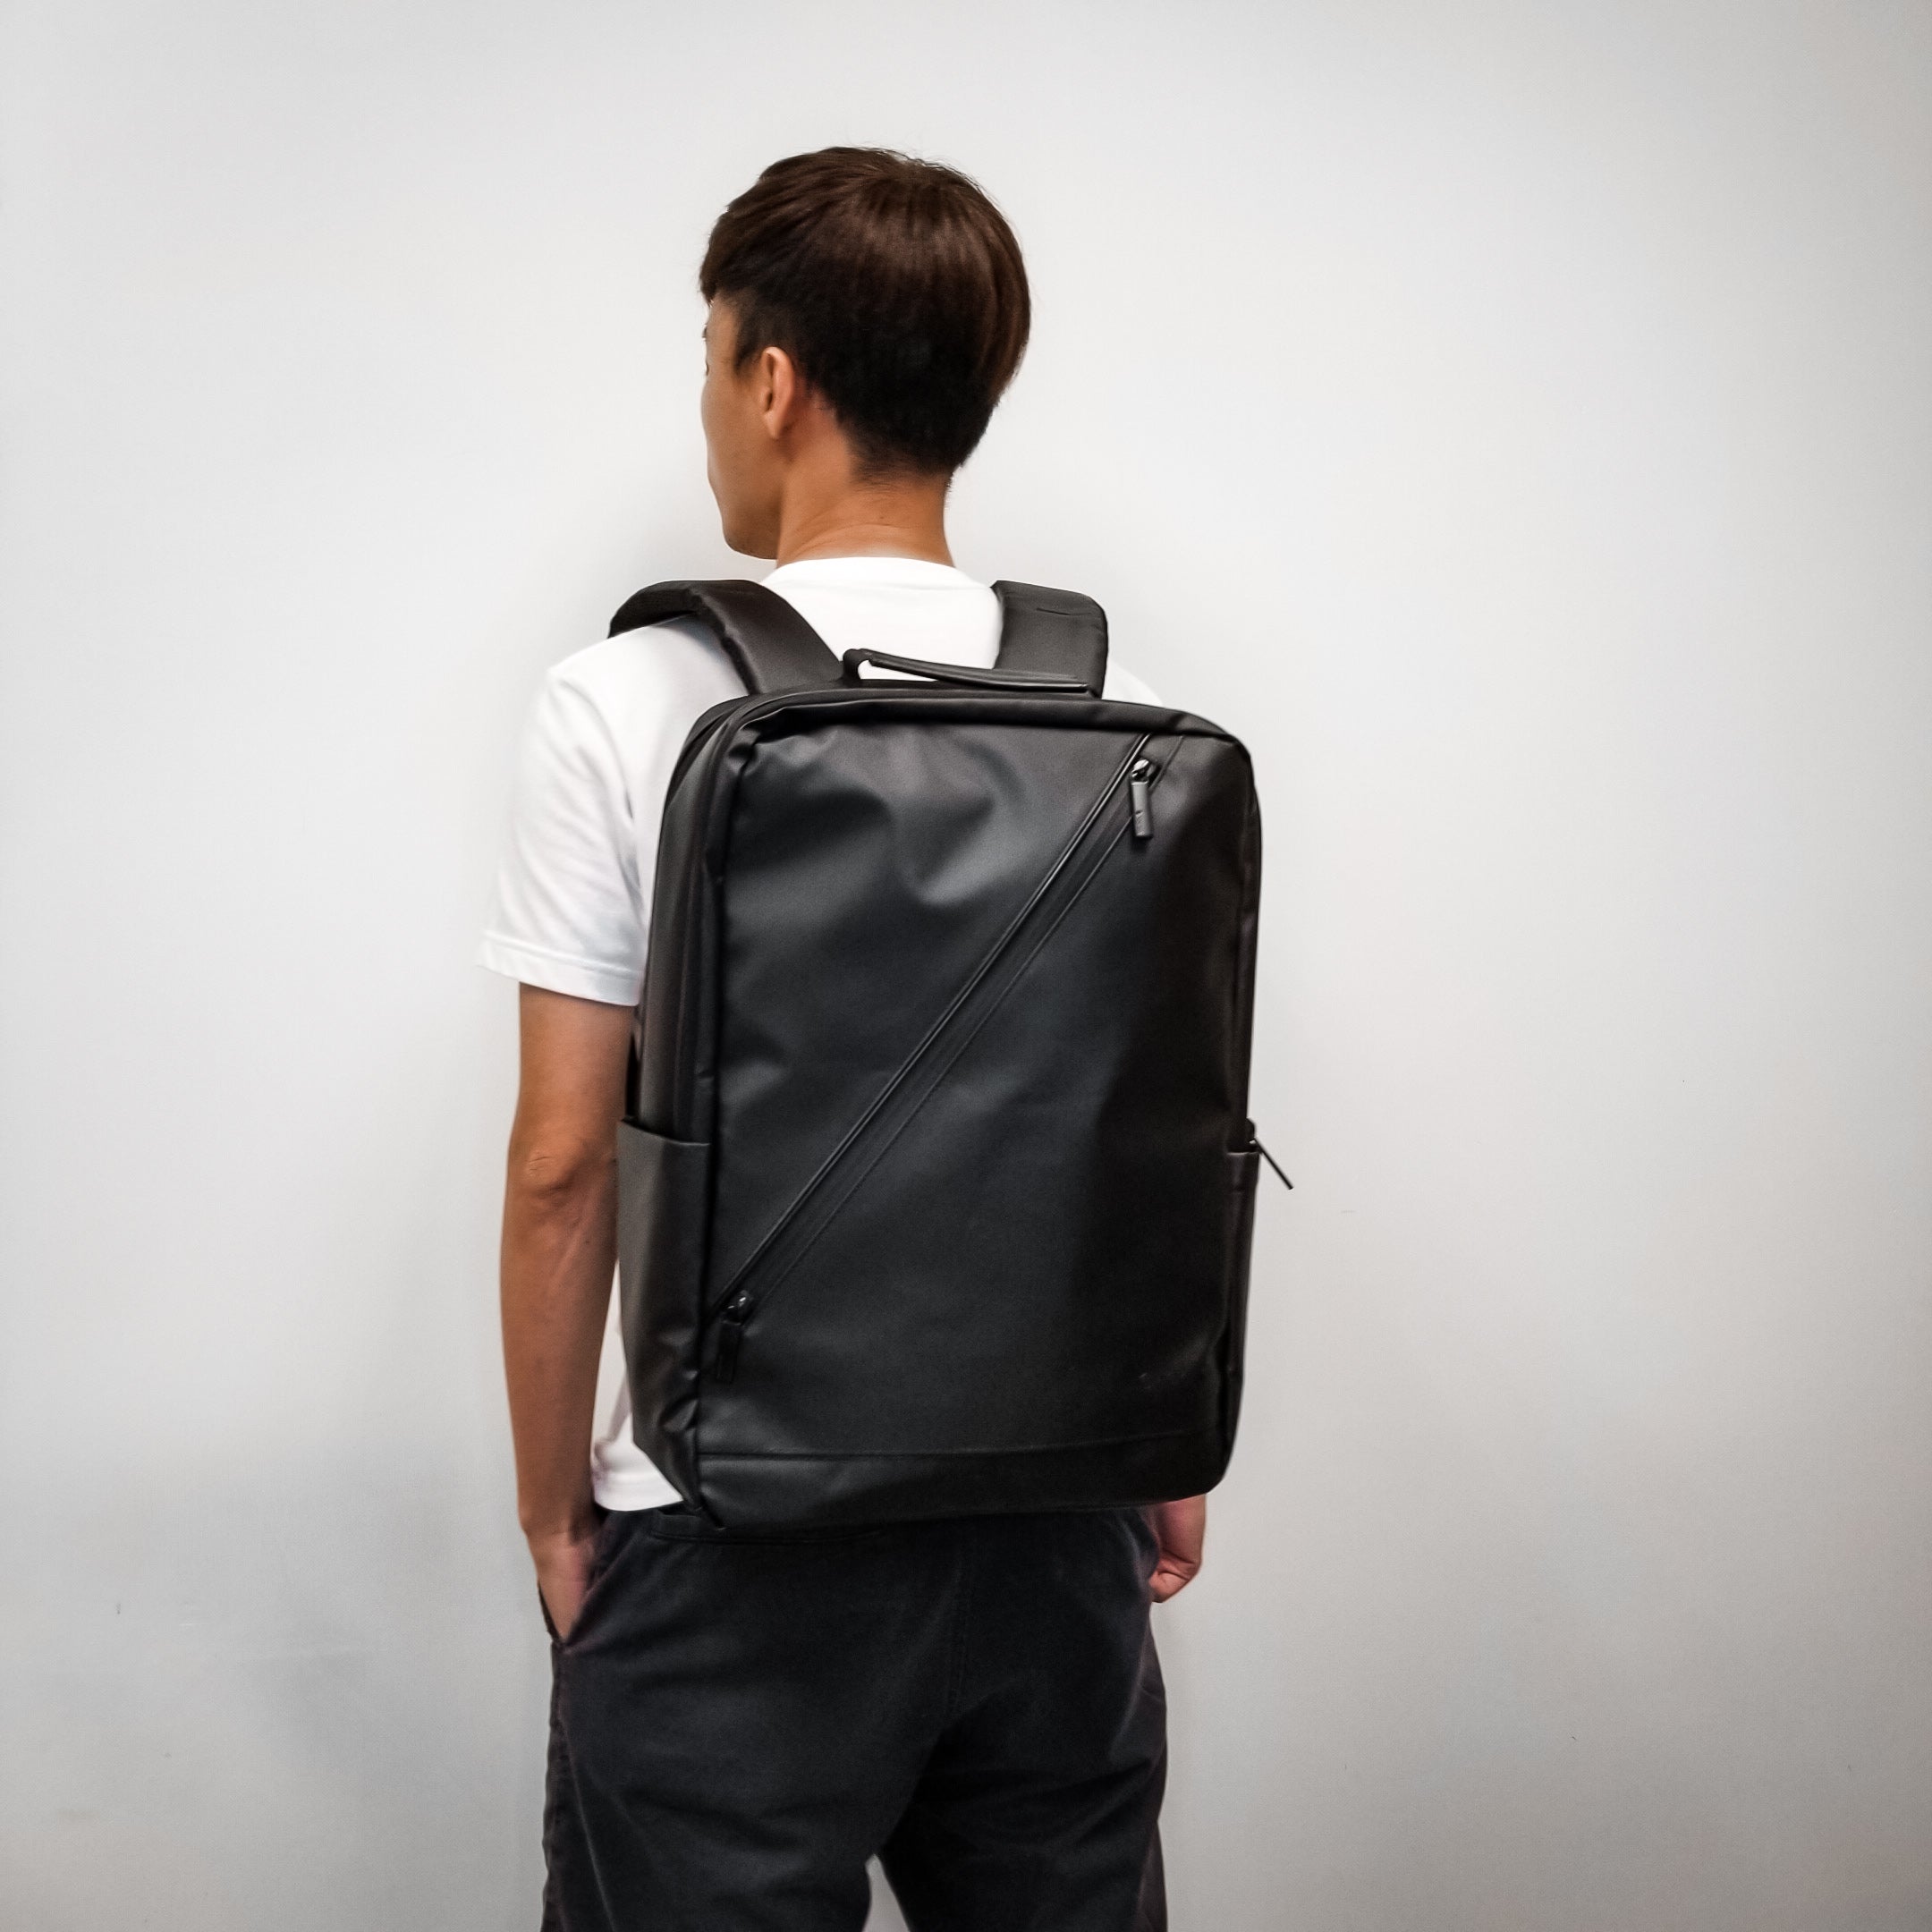 Aoking DUAL USB BUSINESS MEN BACKPACK SN96892